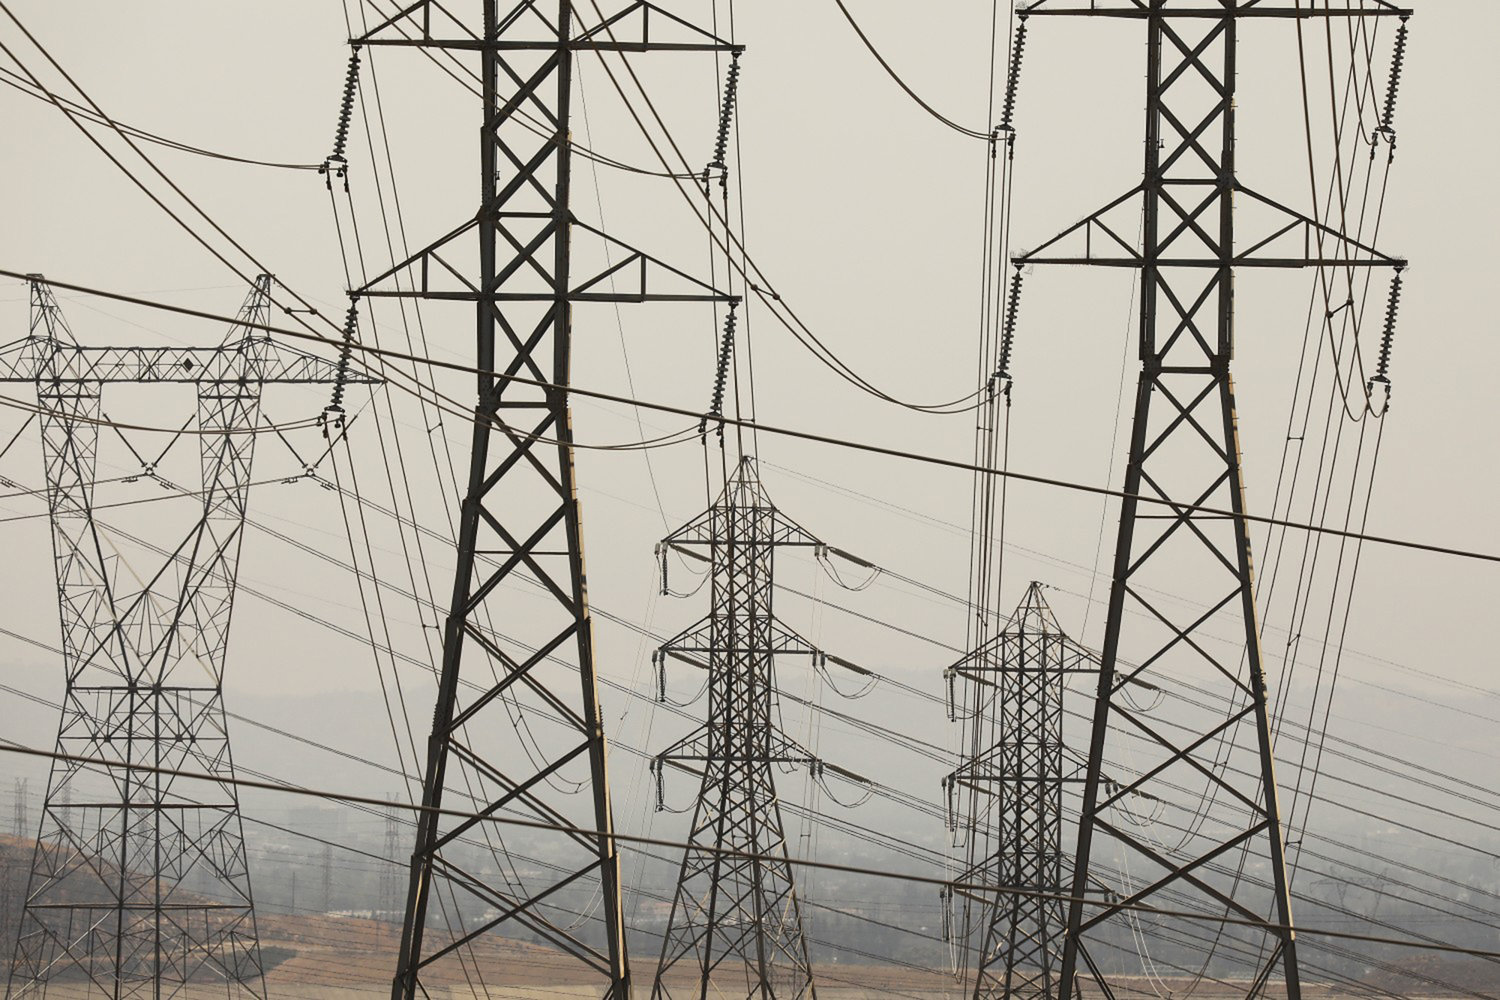 DC Power lines in the North San Fernando Valley near the Sylmar Converter Station in Los Angeles on July 12, 2021. (Al Seib/Los Angeles Times/TNS)